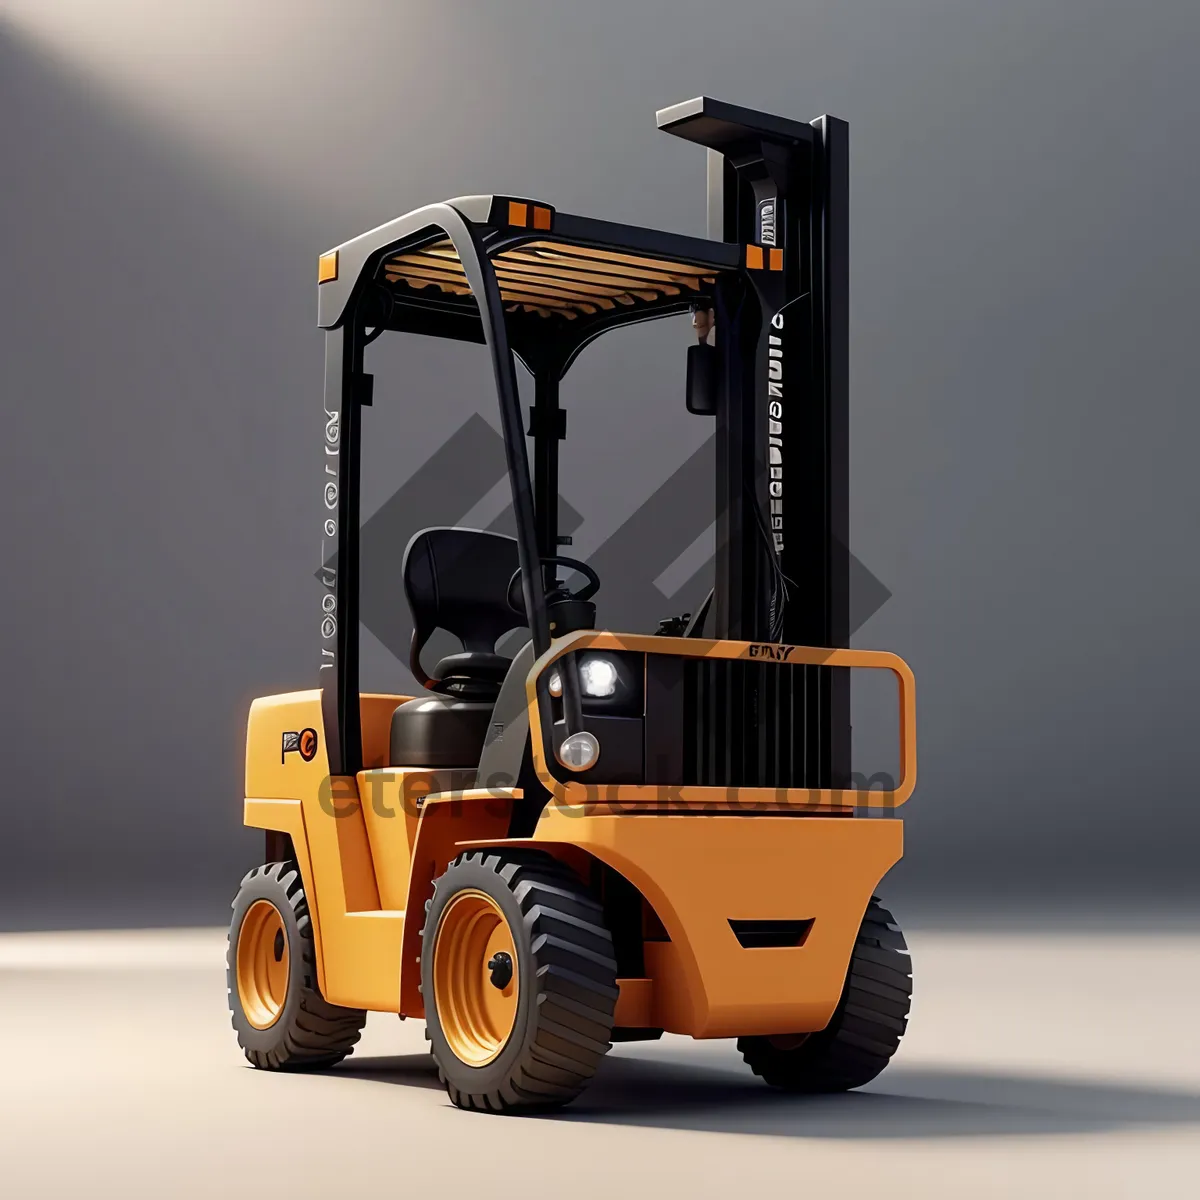 Picture of Yellow Forklift Truck: Heavy Industrial Vehicle for Efficient Cargo Transportation.